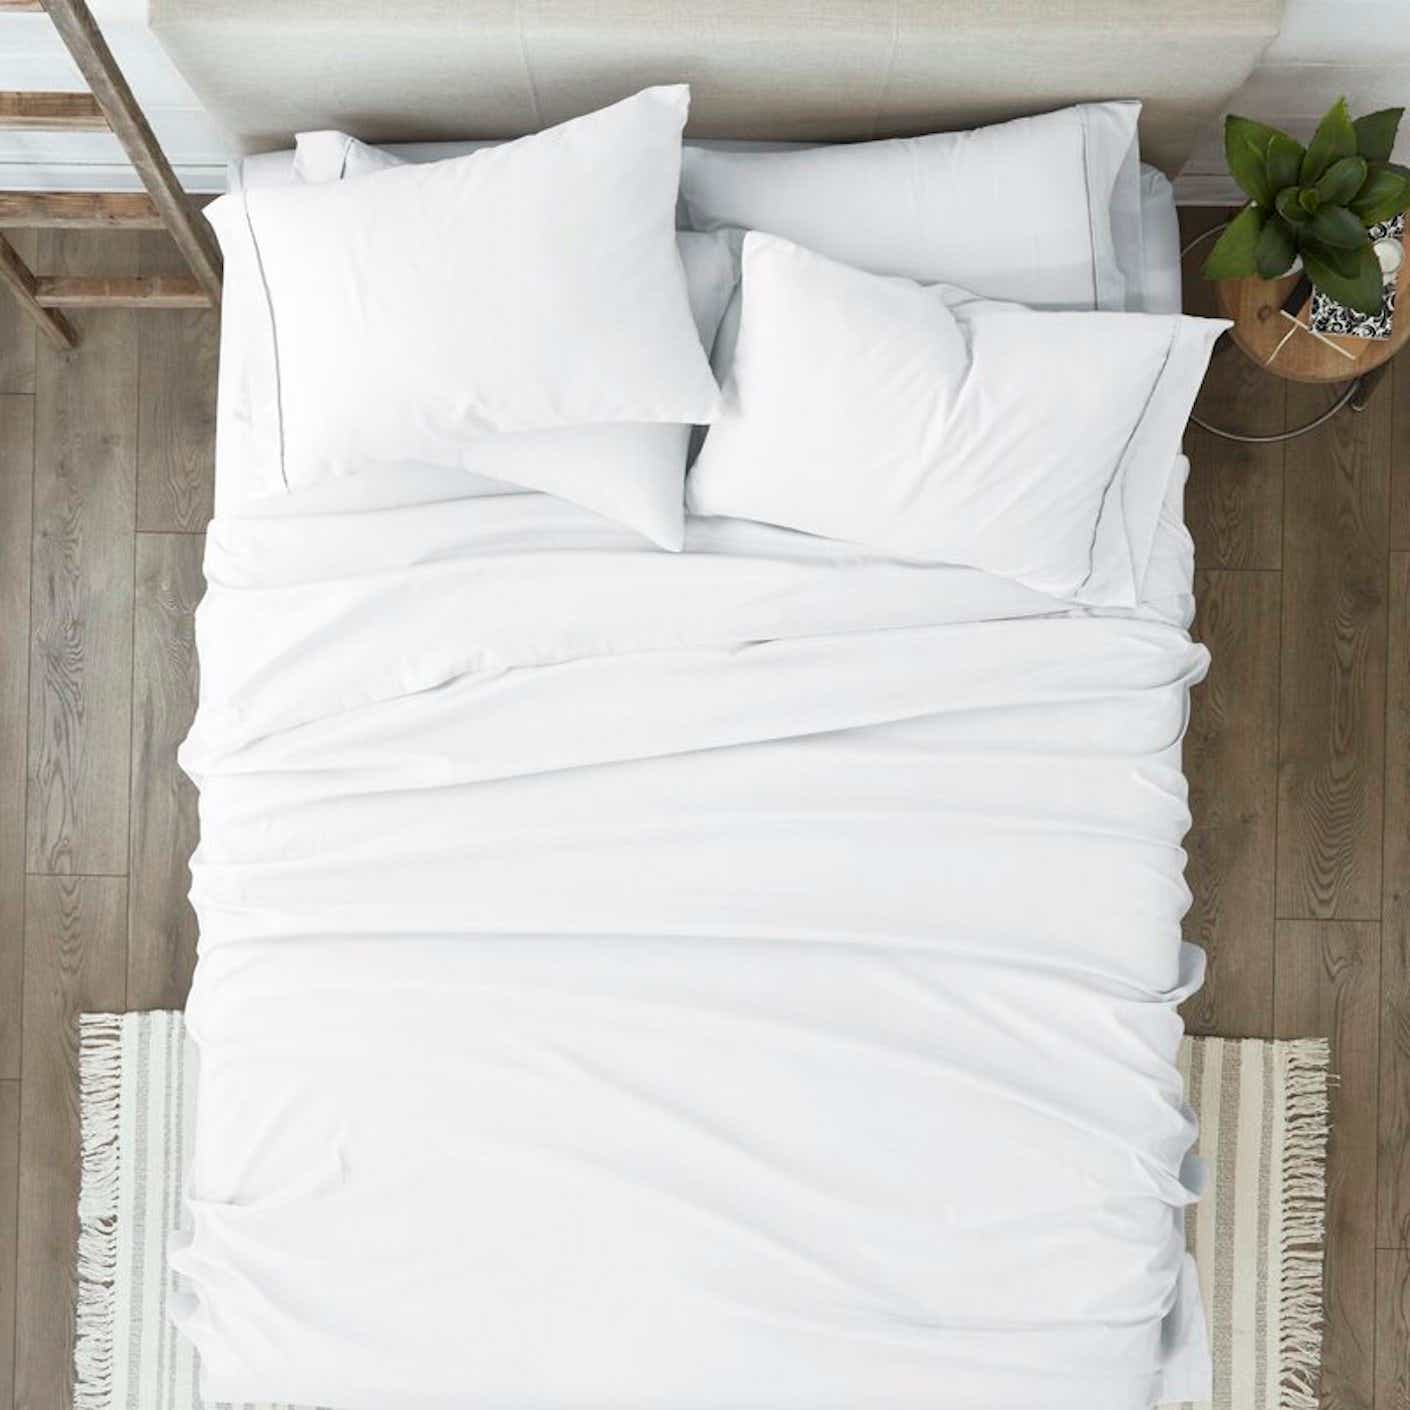 bed with white sheets and pillows